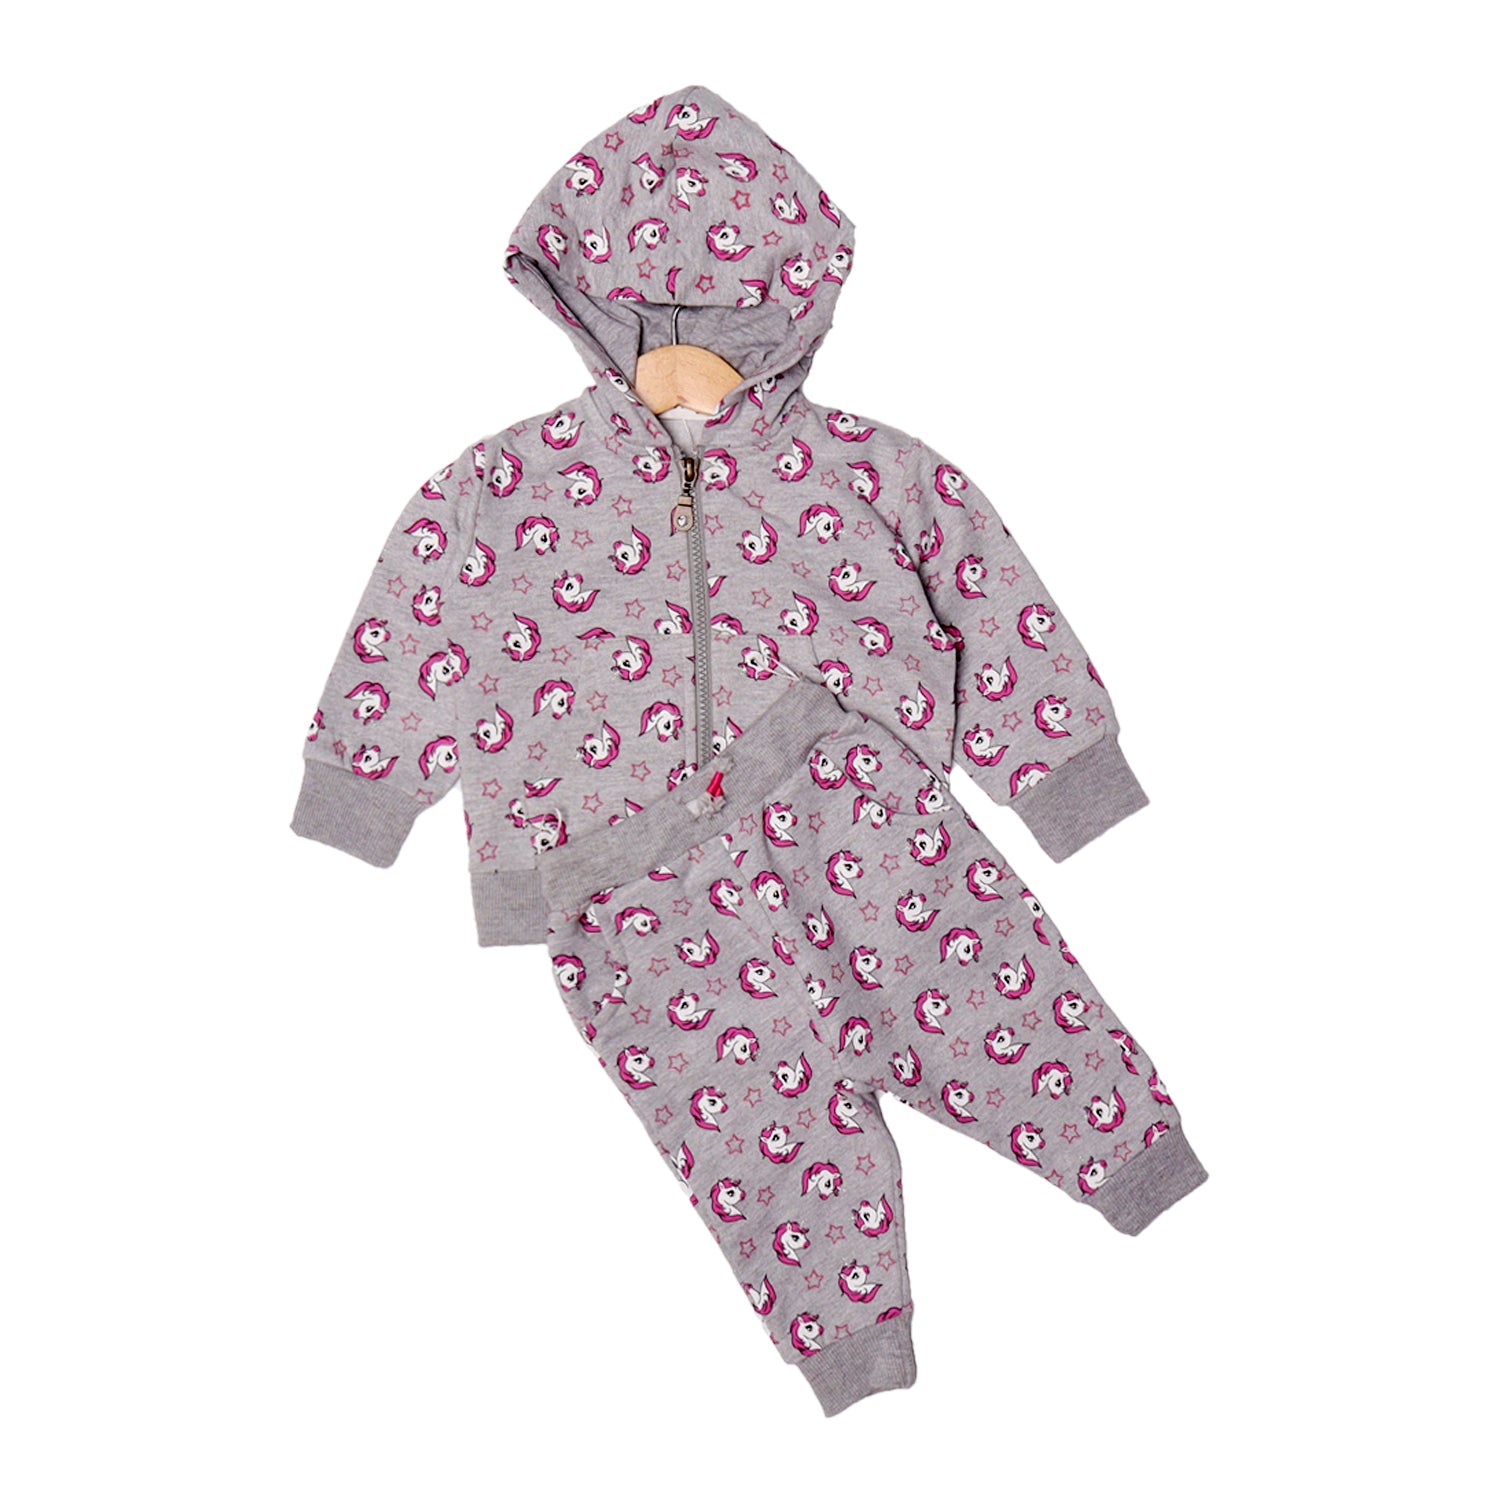 GREY UNICORN & STARS PRINTED WITH ZIPPER HOODIE SUIT FOR GIRLS